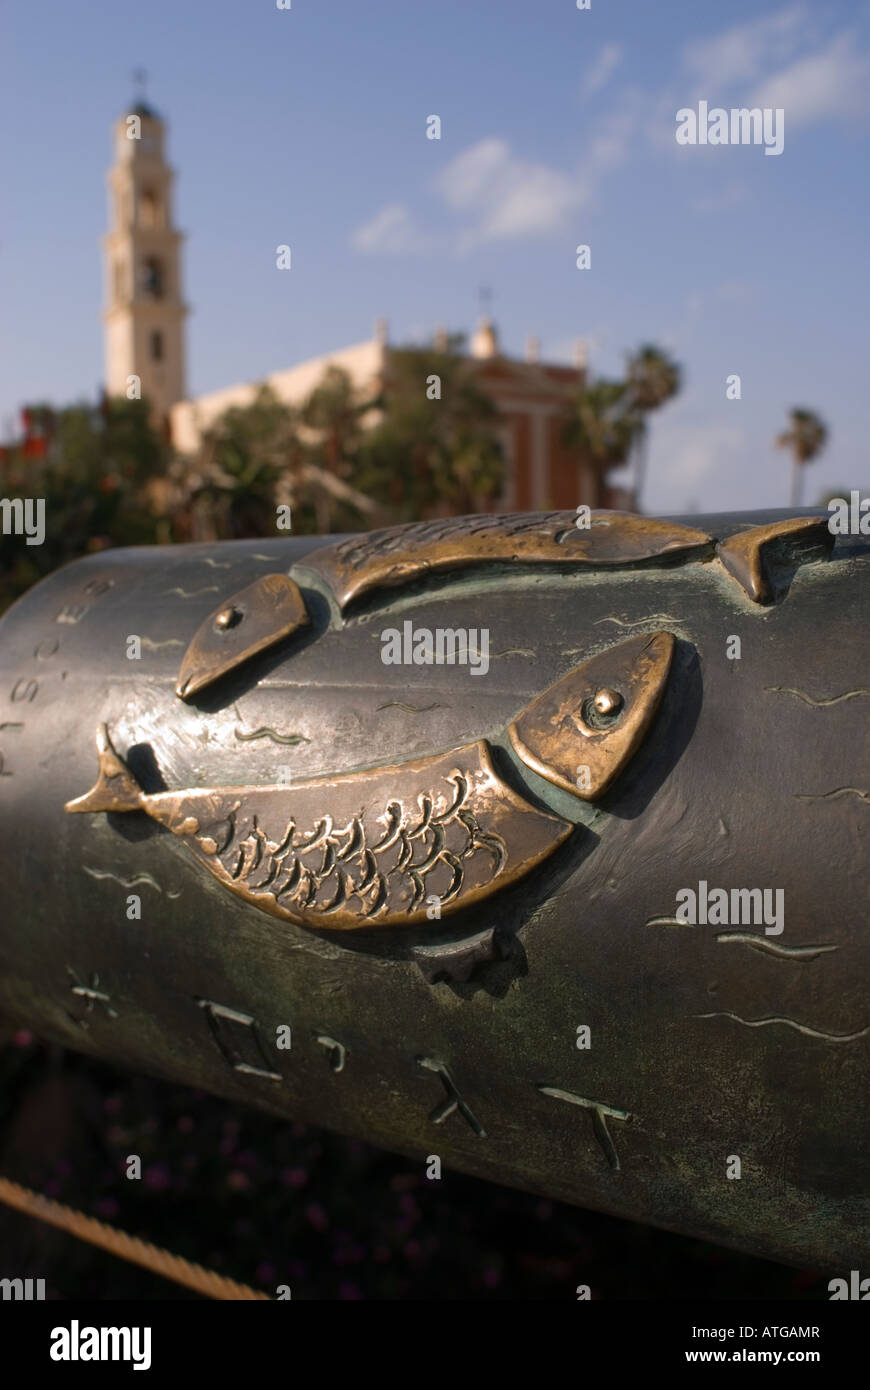 Relief of the Pisces astrological sign in the banister of the 'Wishing Bridge' with St Peter church in background, Old Jaffa Israel Stock Photo